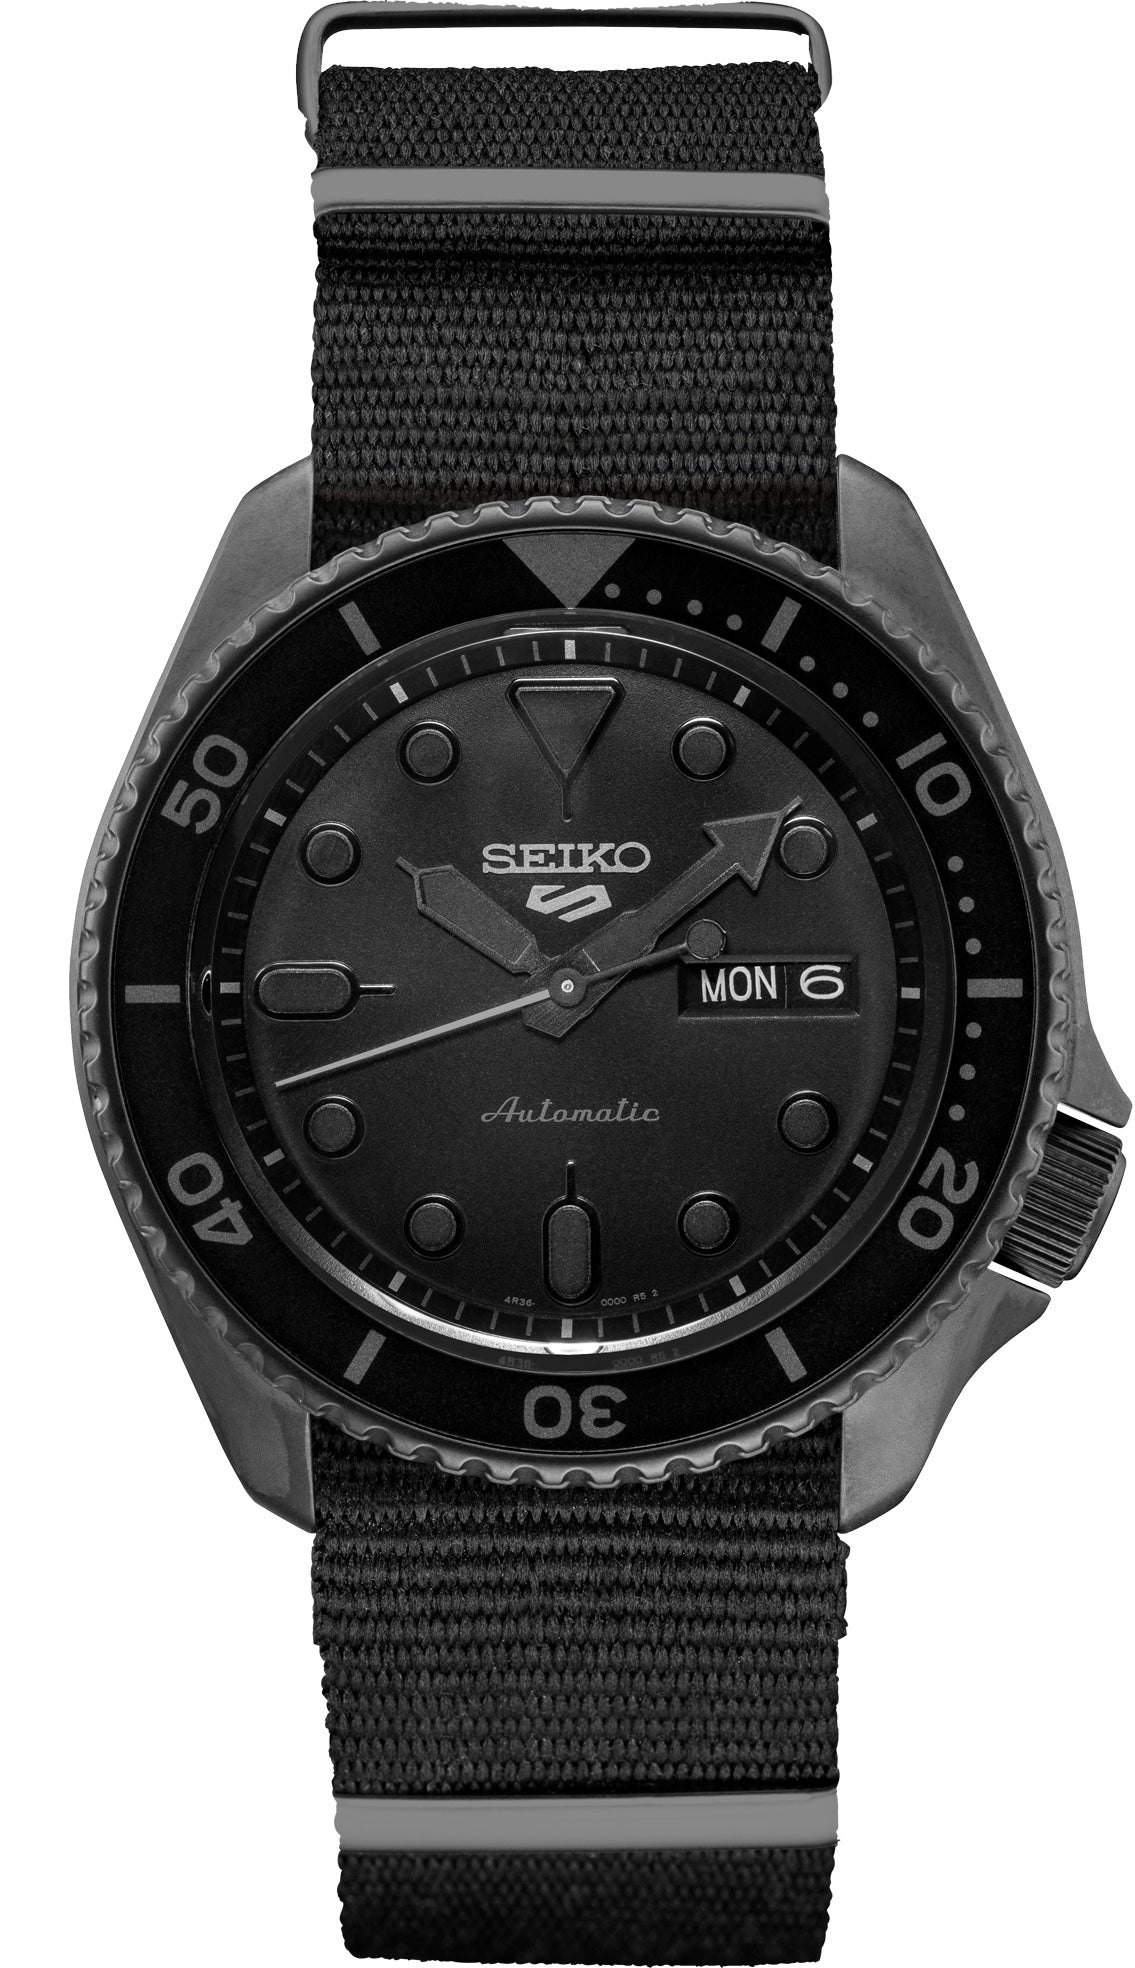 Seiko 5 Sports Men's Stainless Watch in color Black from the front view